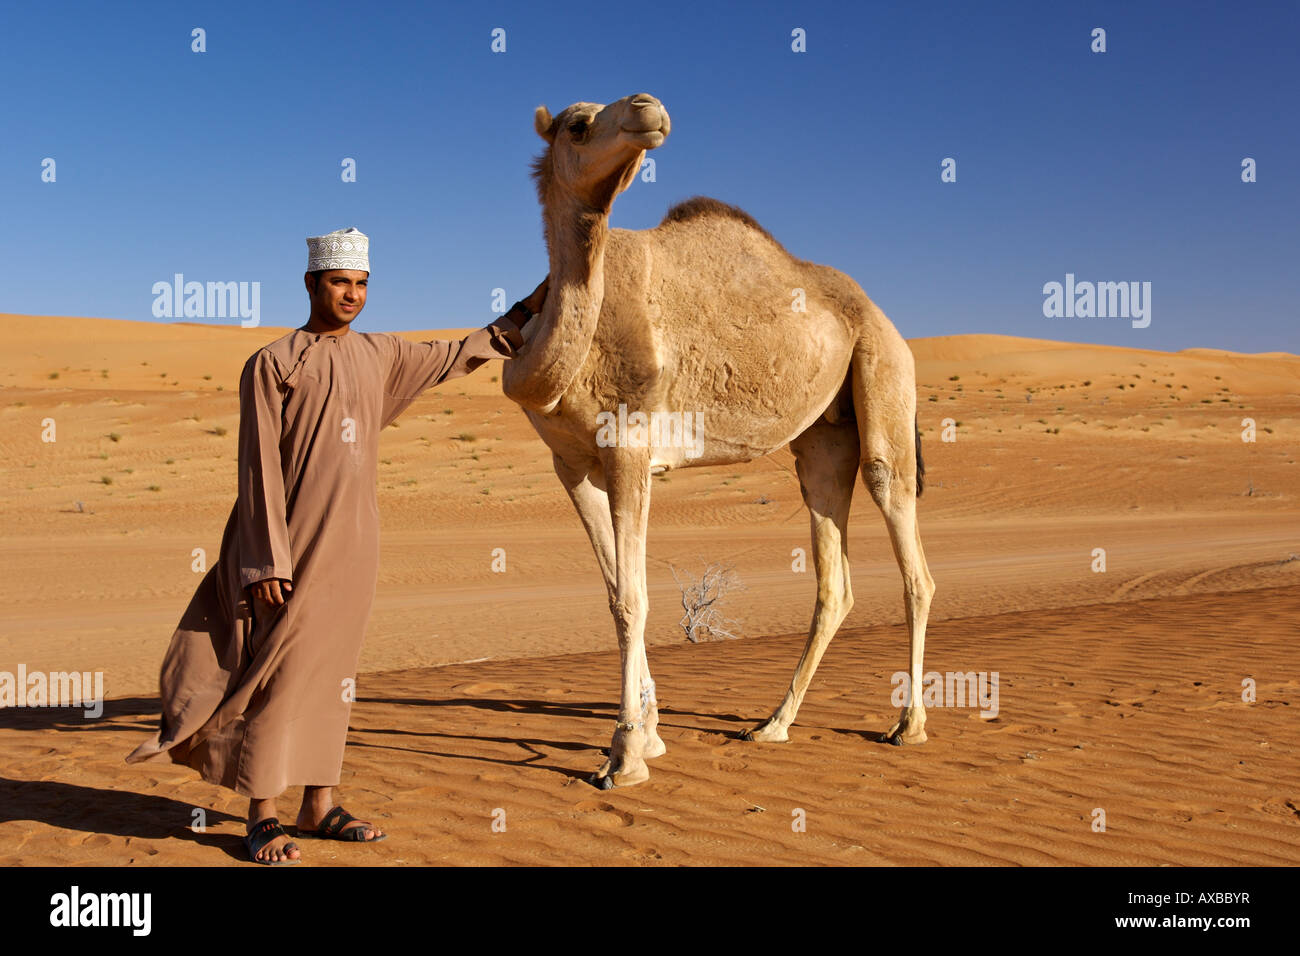 An Omani man standing with an Arabian camel a.k.a. a one-humped dromedary (Camelus dromedarius) in Wahiba Sands in Oman. Stock Photo